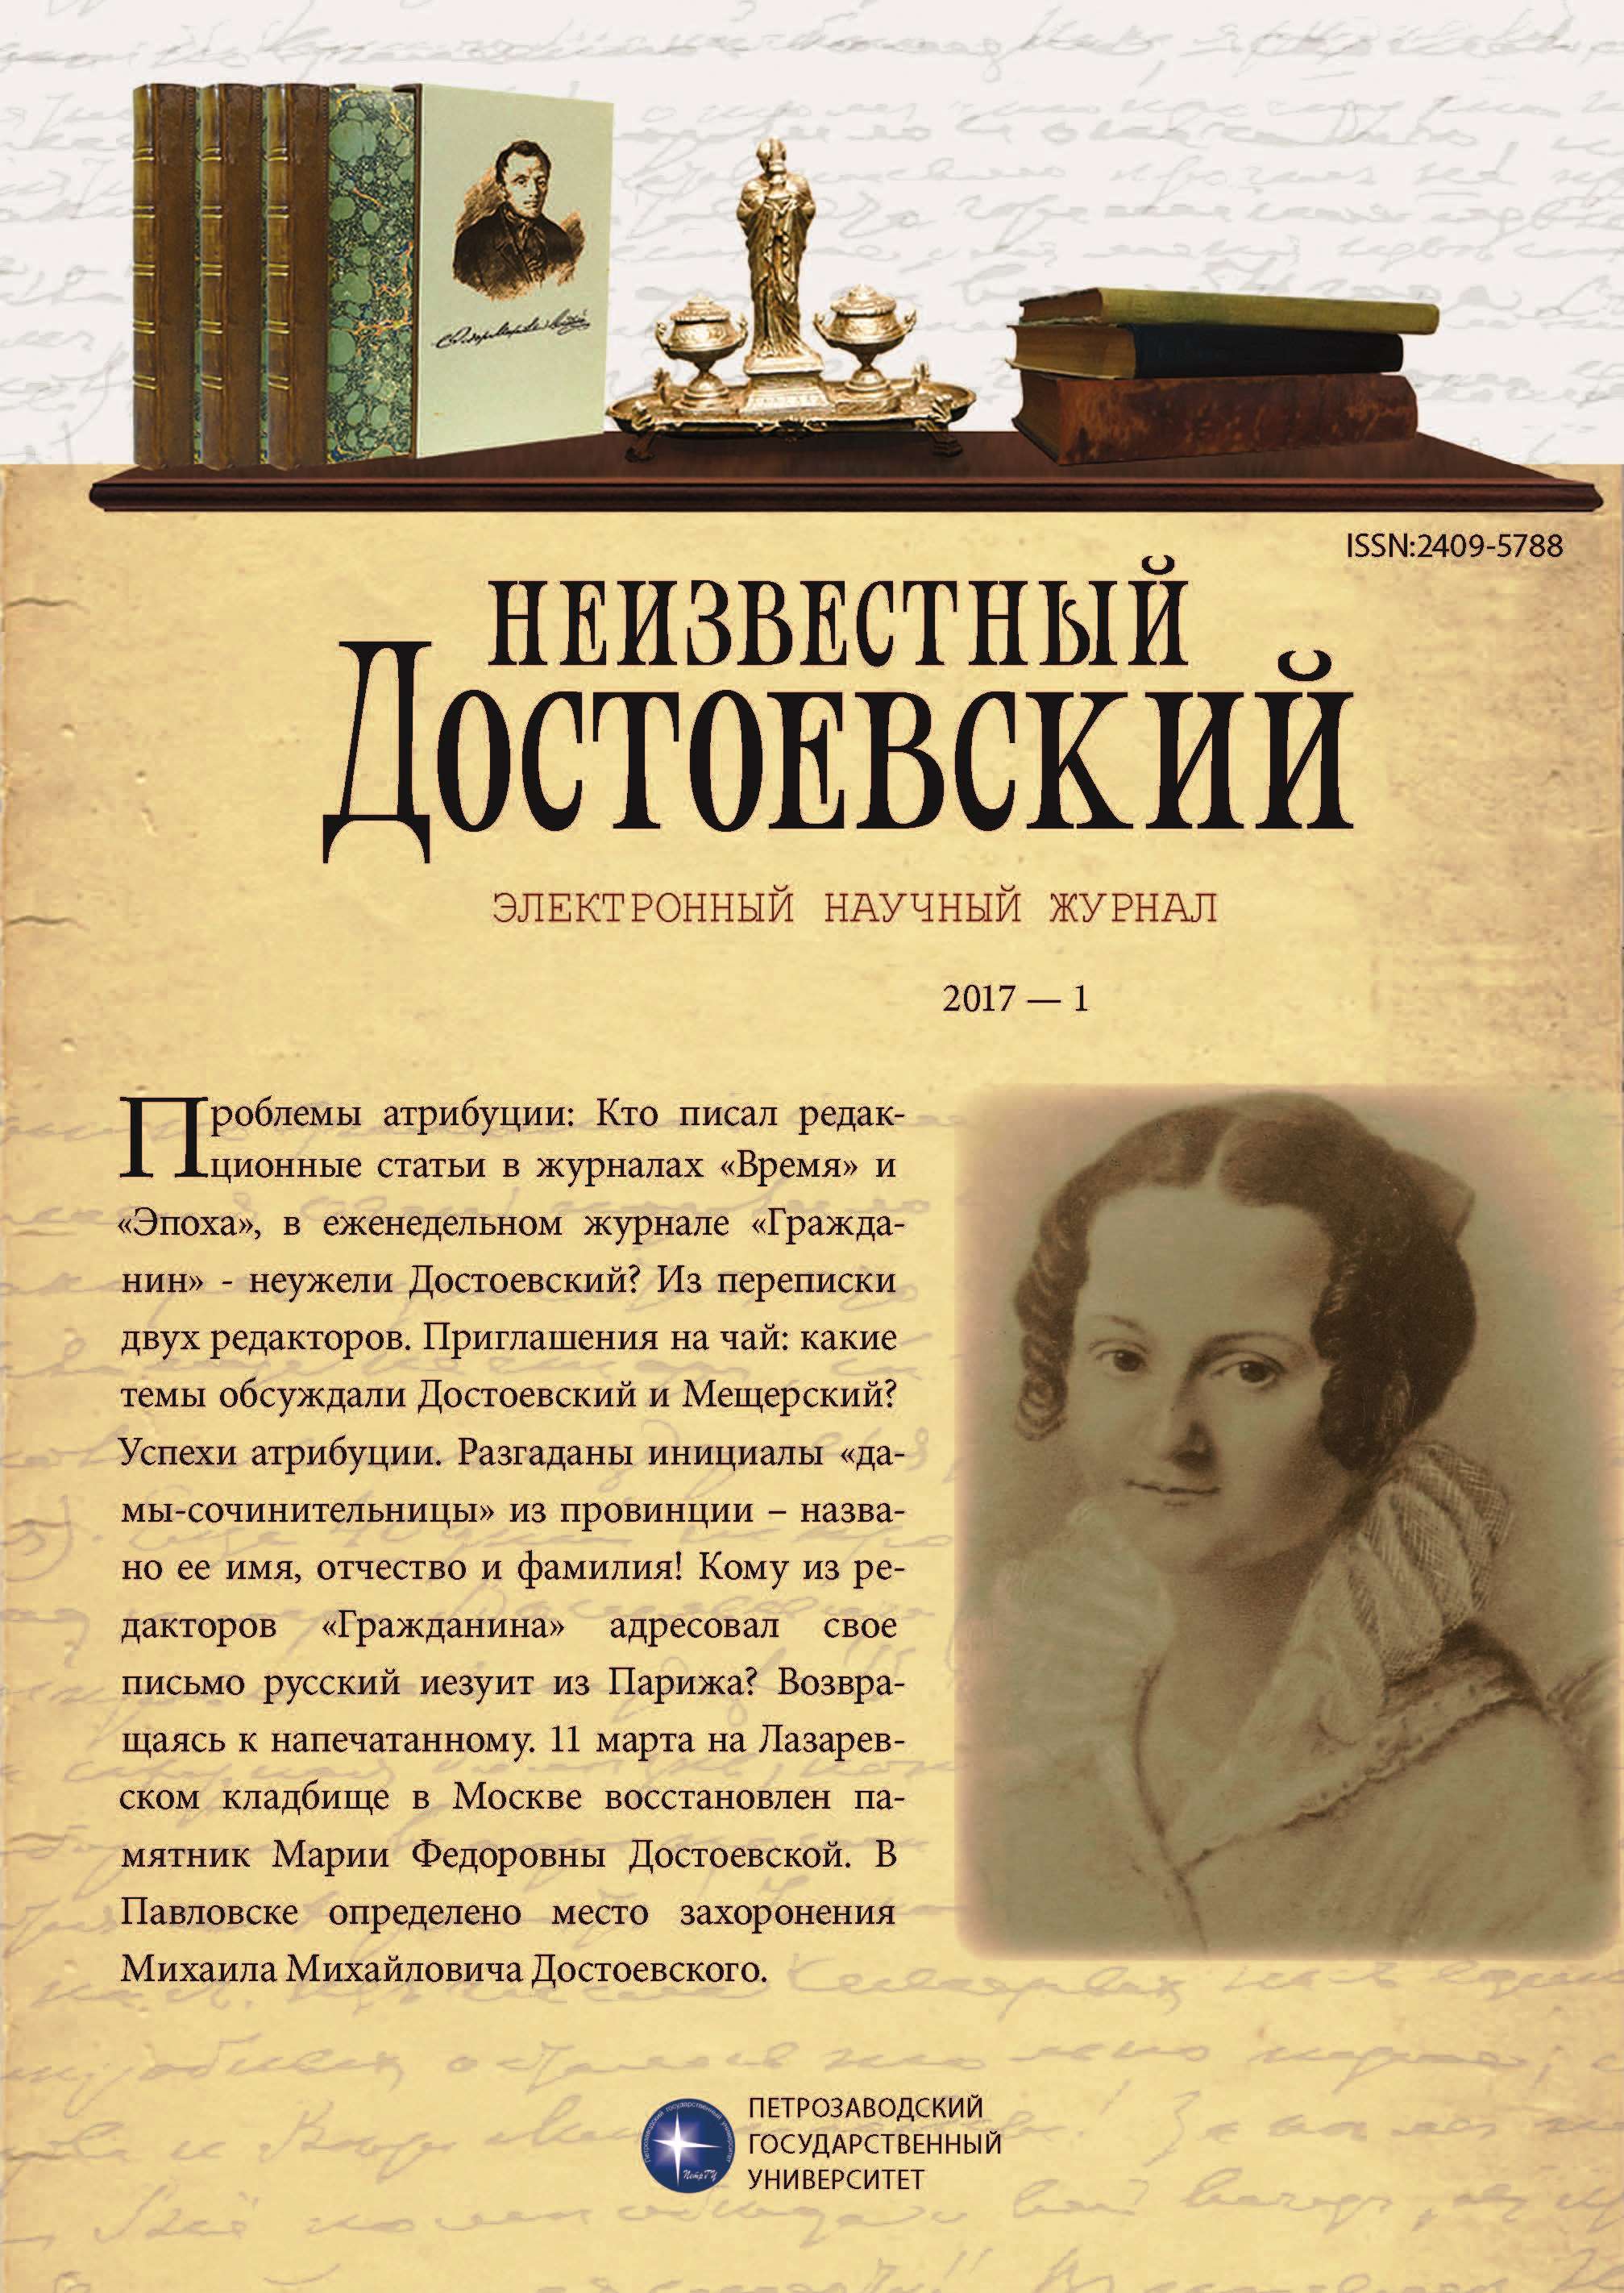 "A Female Author" from the Сountry: Attribution of the Letter of Dostoevsky’s Correspondent Cover Image